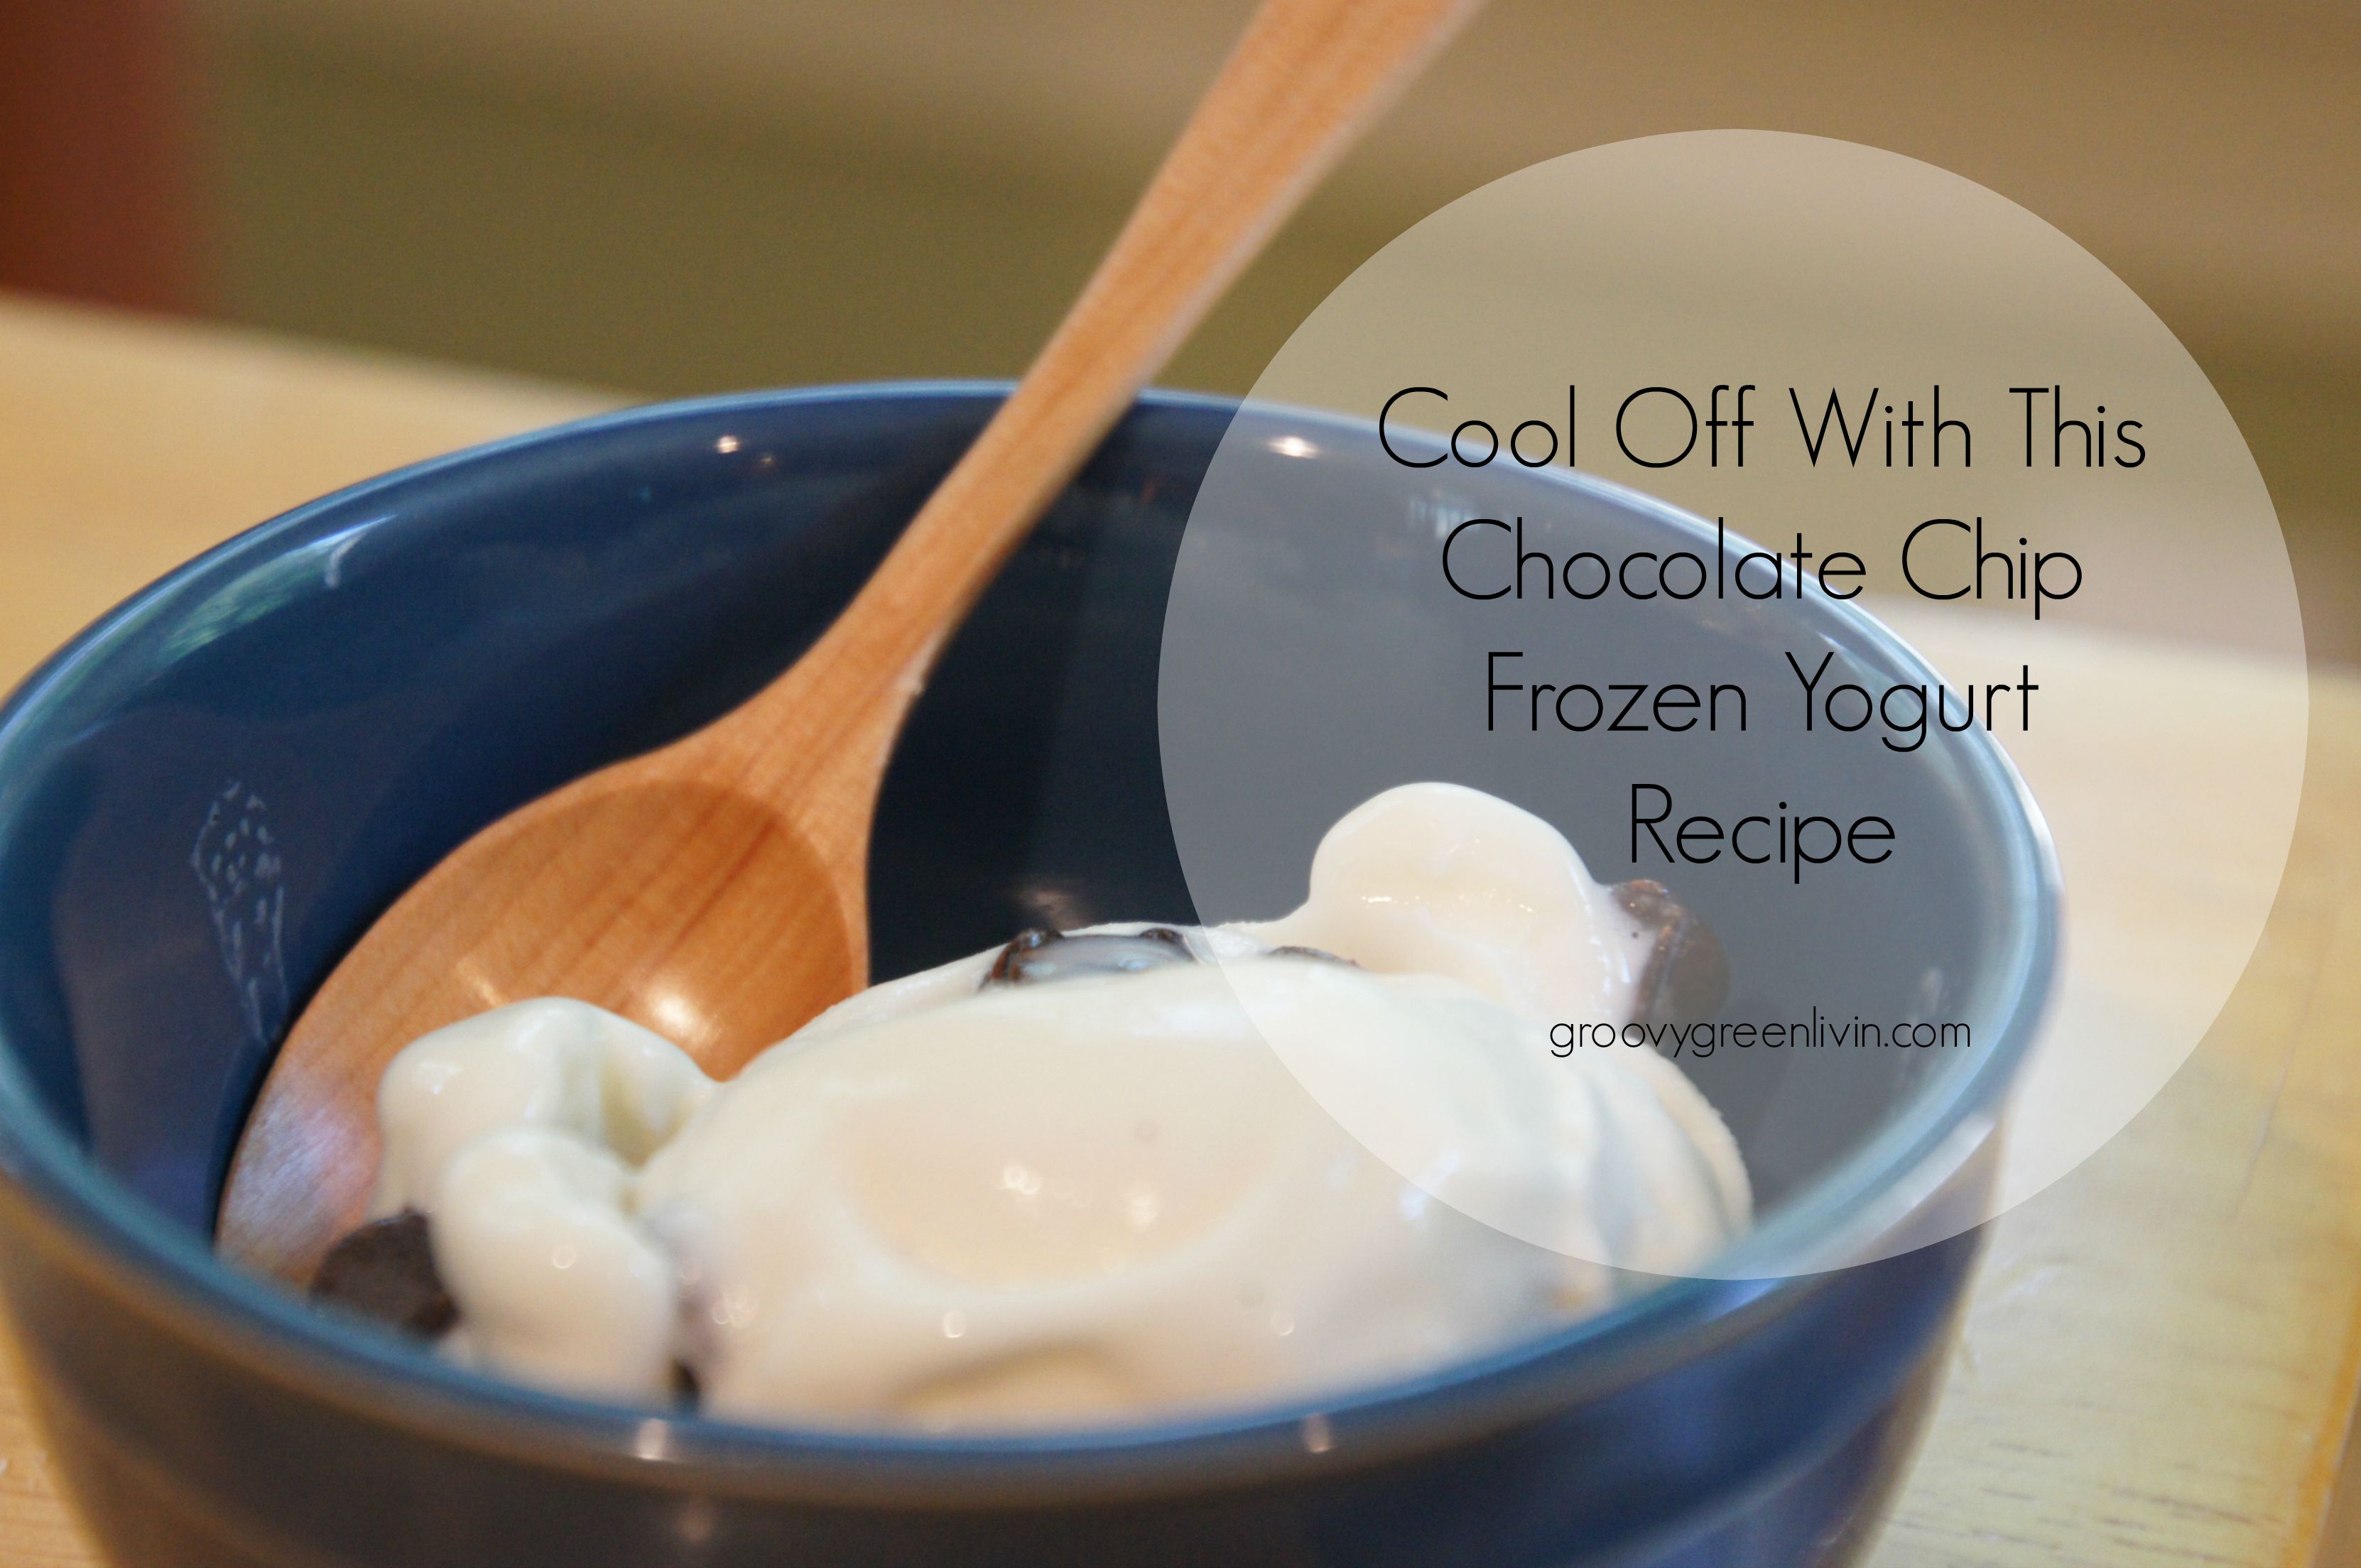 Cool Off With This Chocolate Chip Frozen Yogurt Recipe